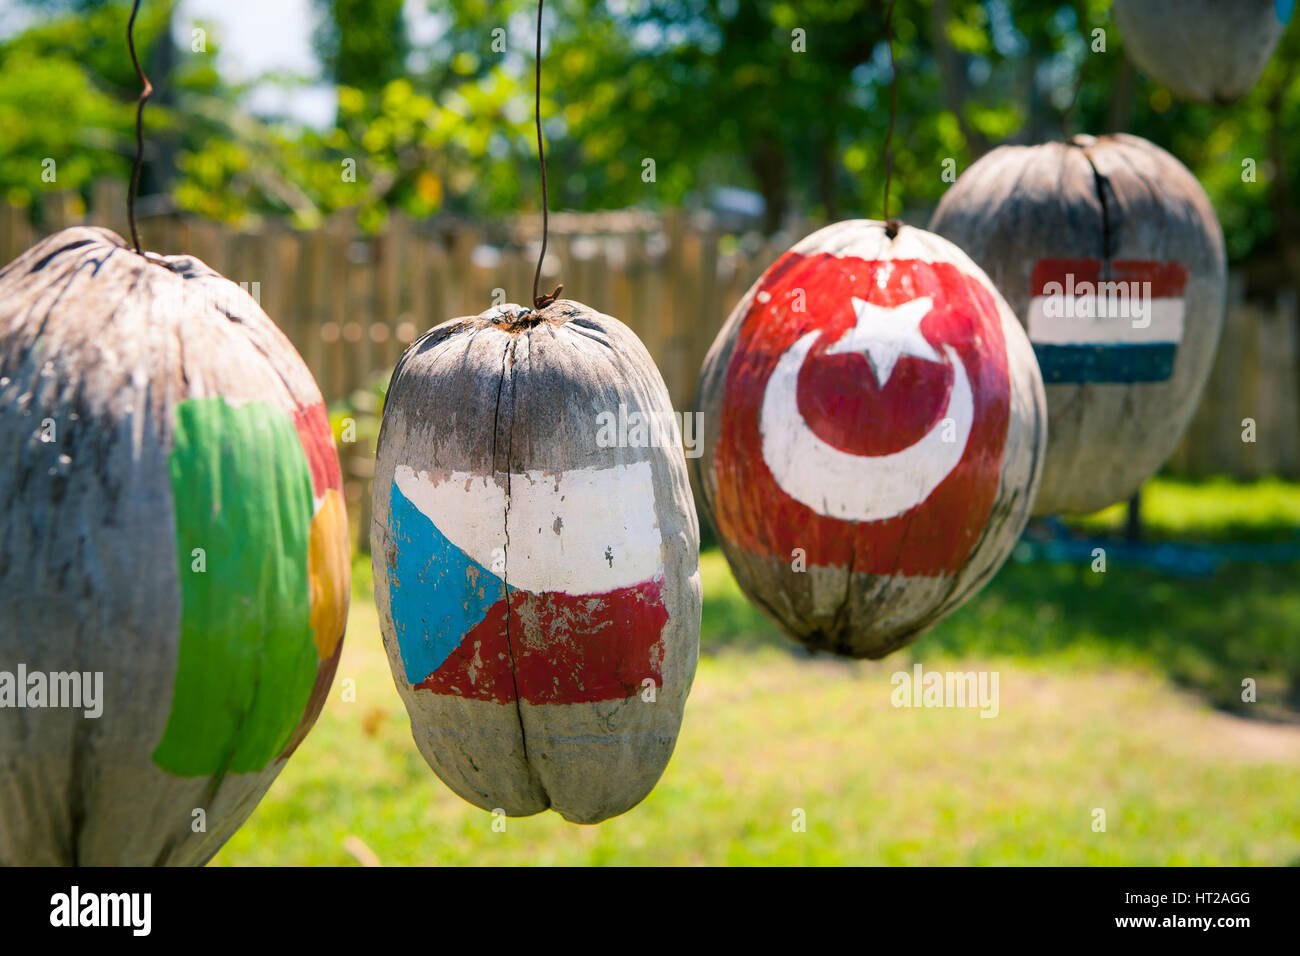 Many flags of countries painted on the coconuts Stock Photo